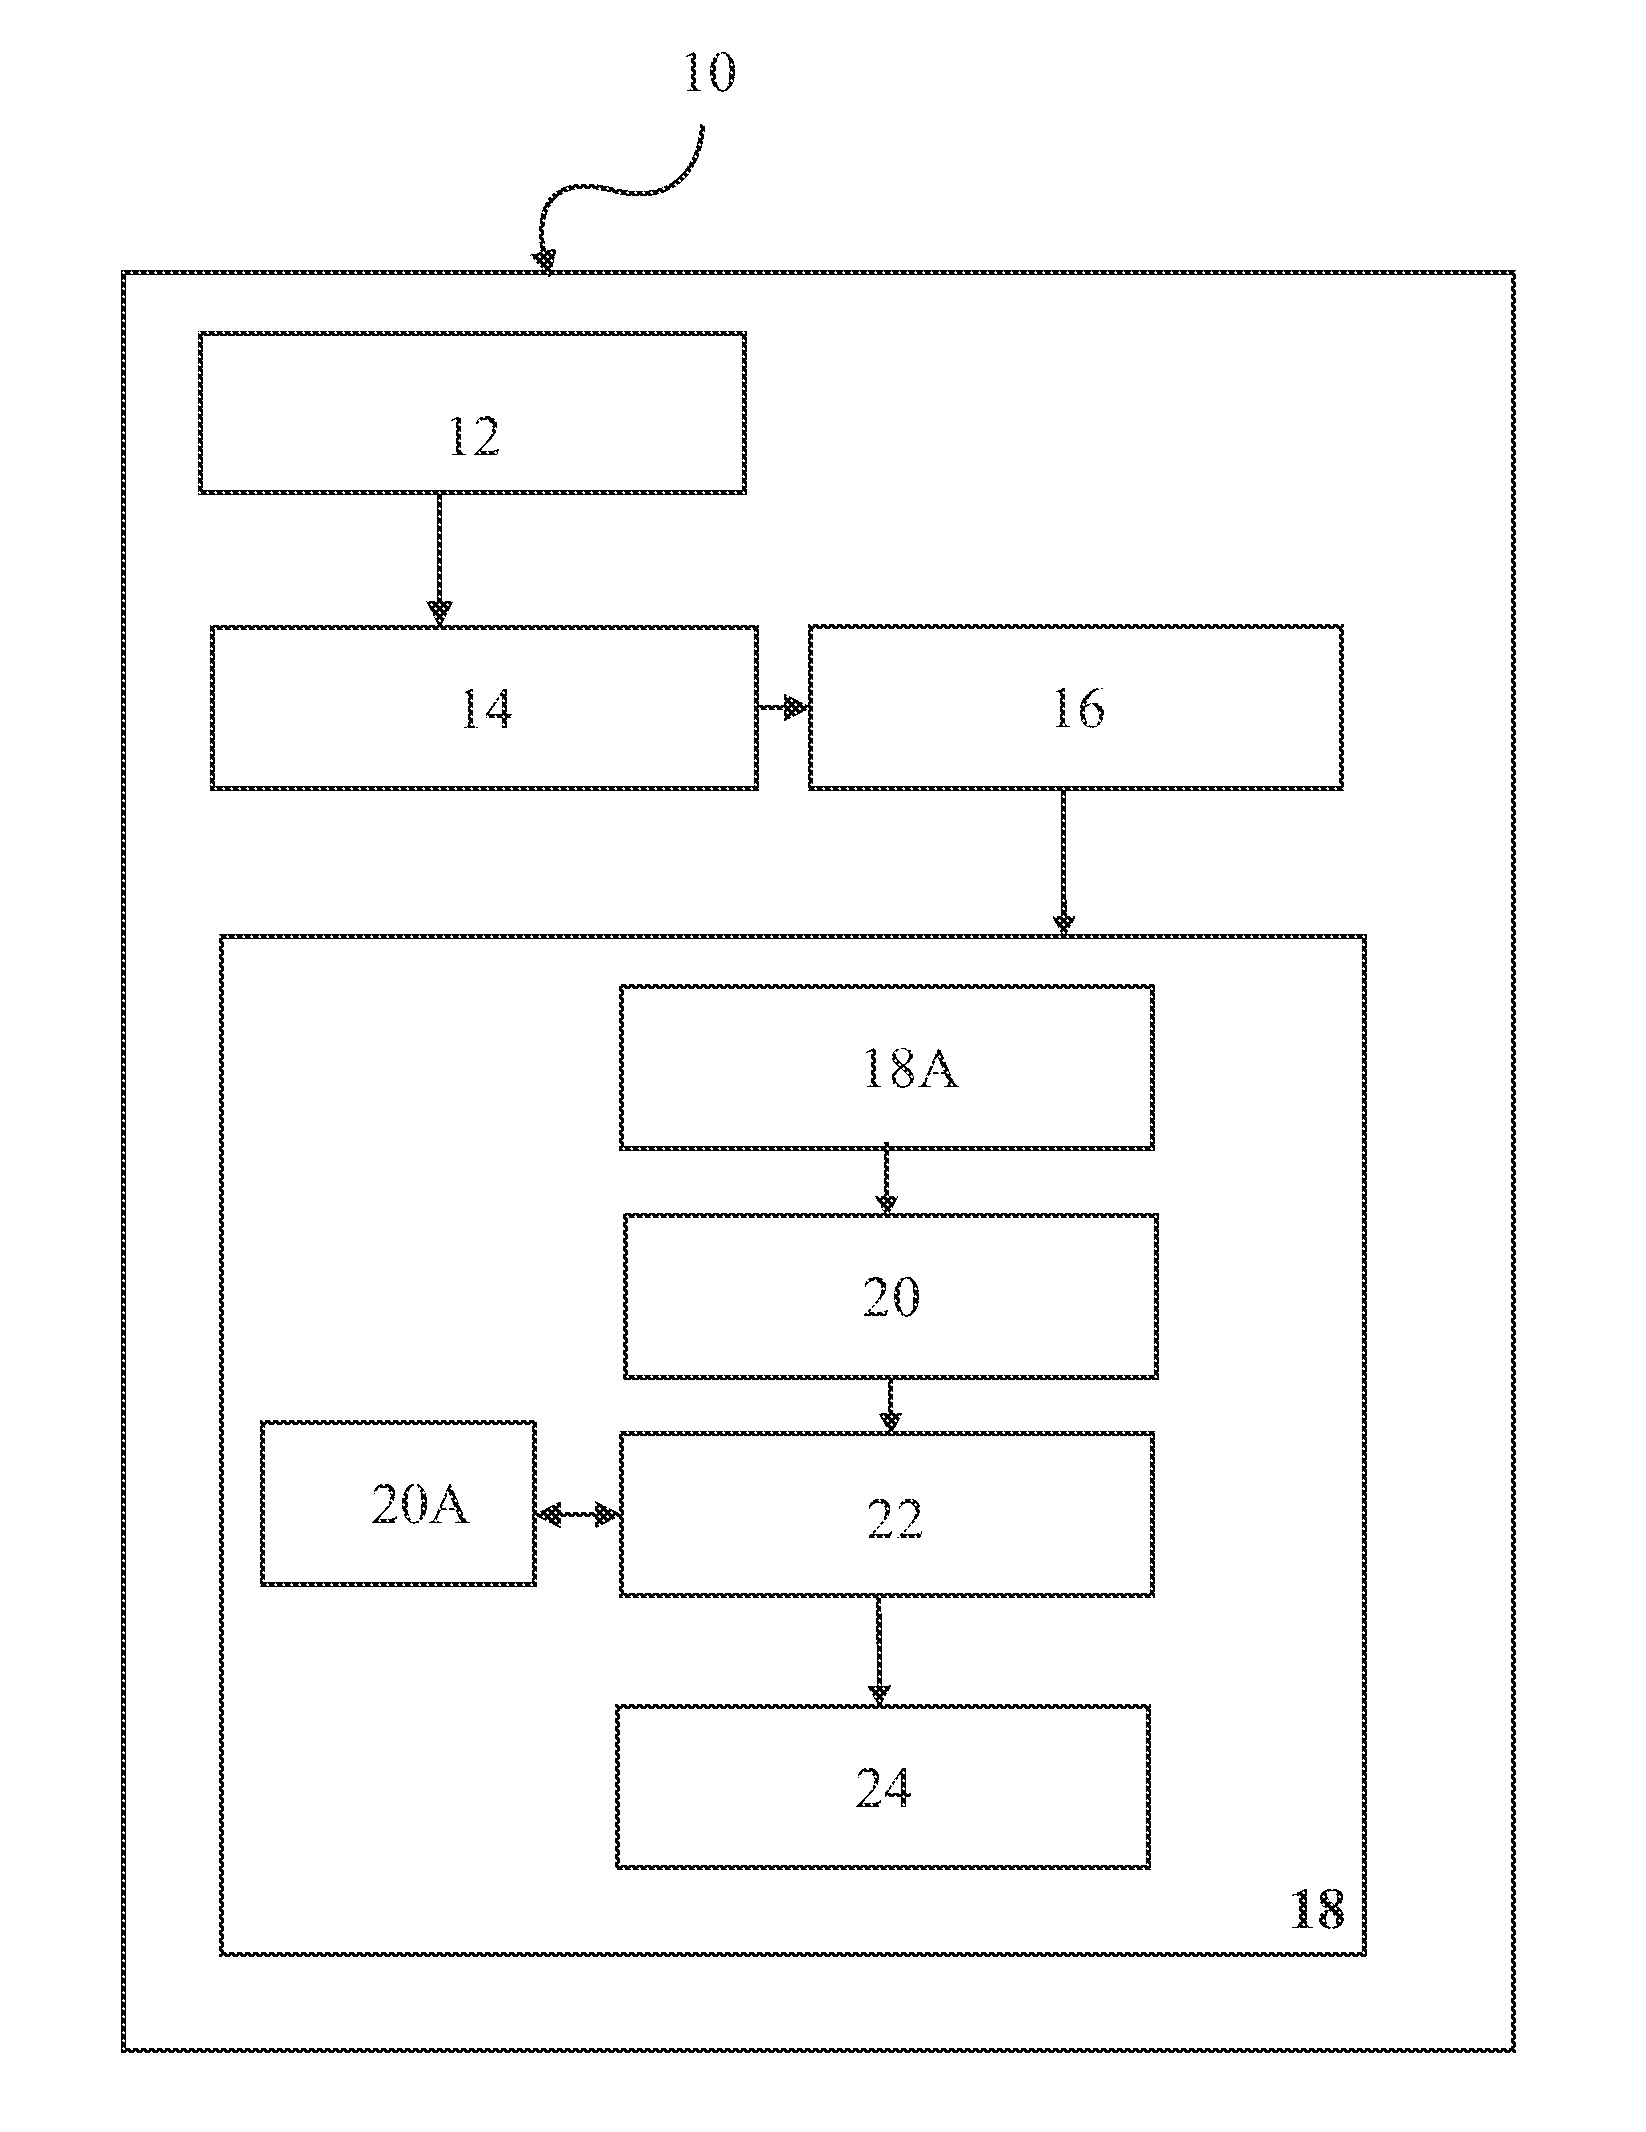 Computer implemented system and method for indexing and optionally annotating use cases and generating test scenarios therefrom